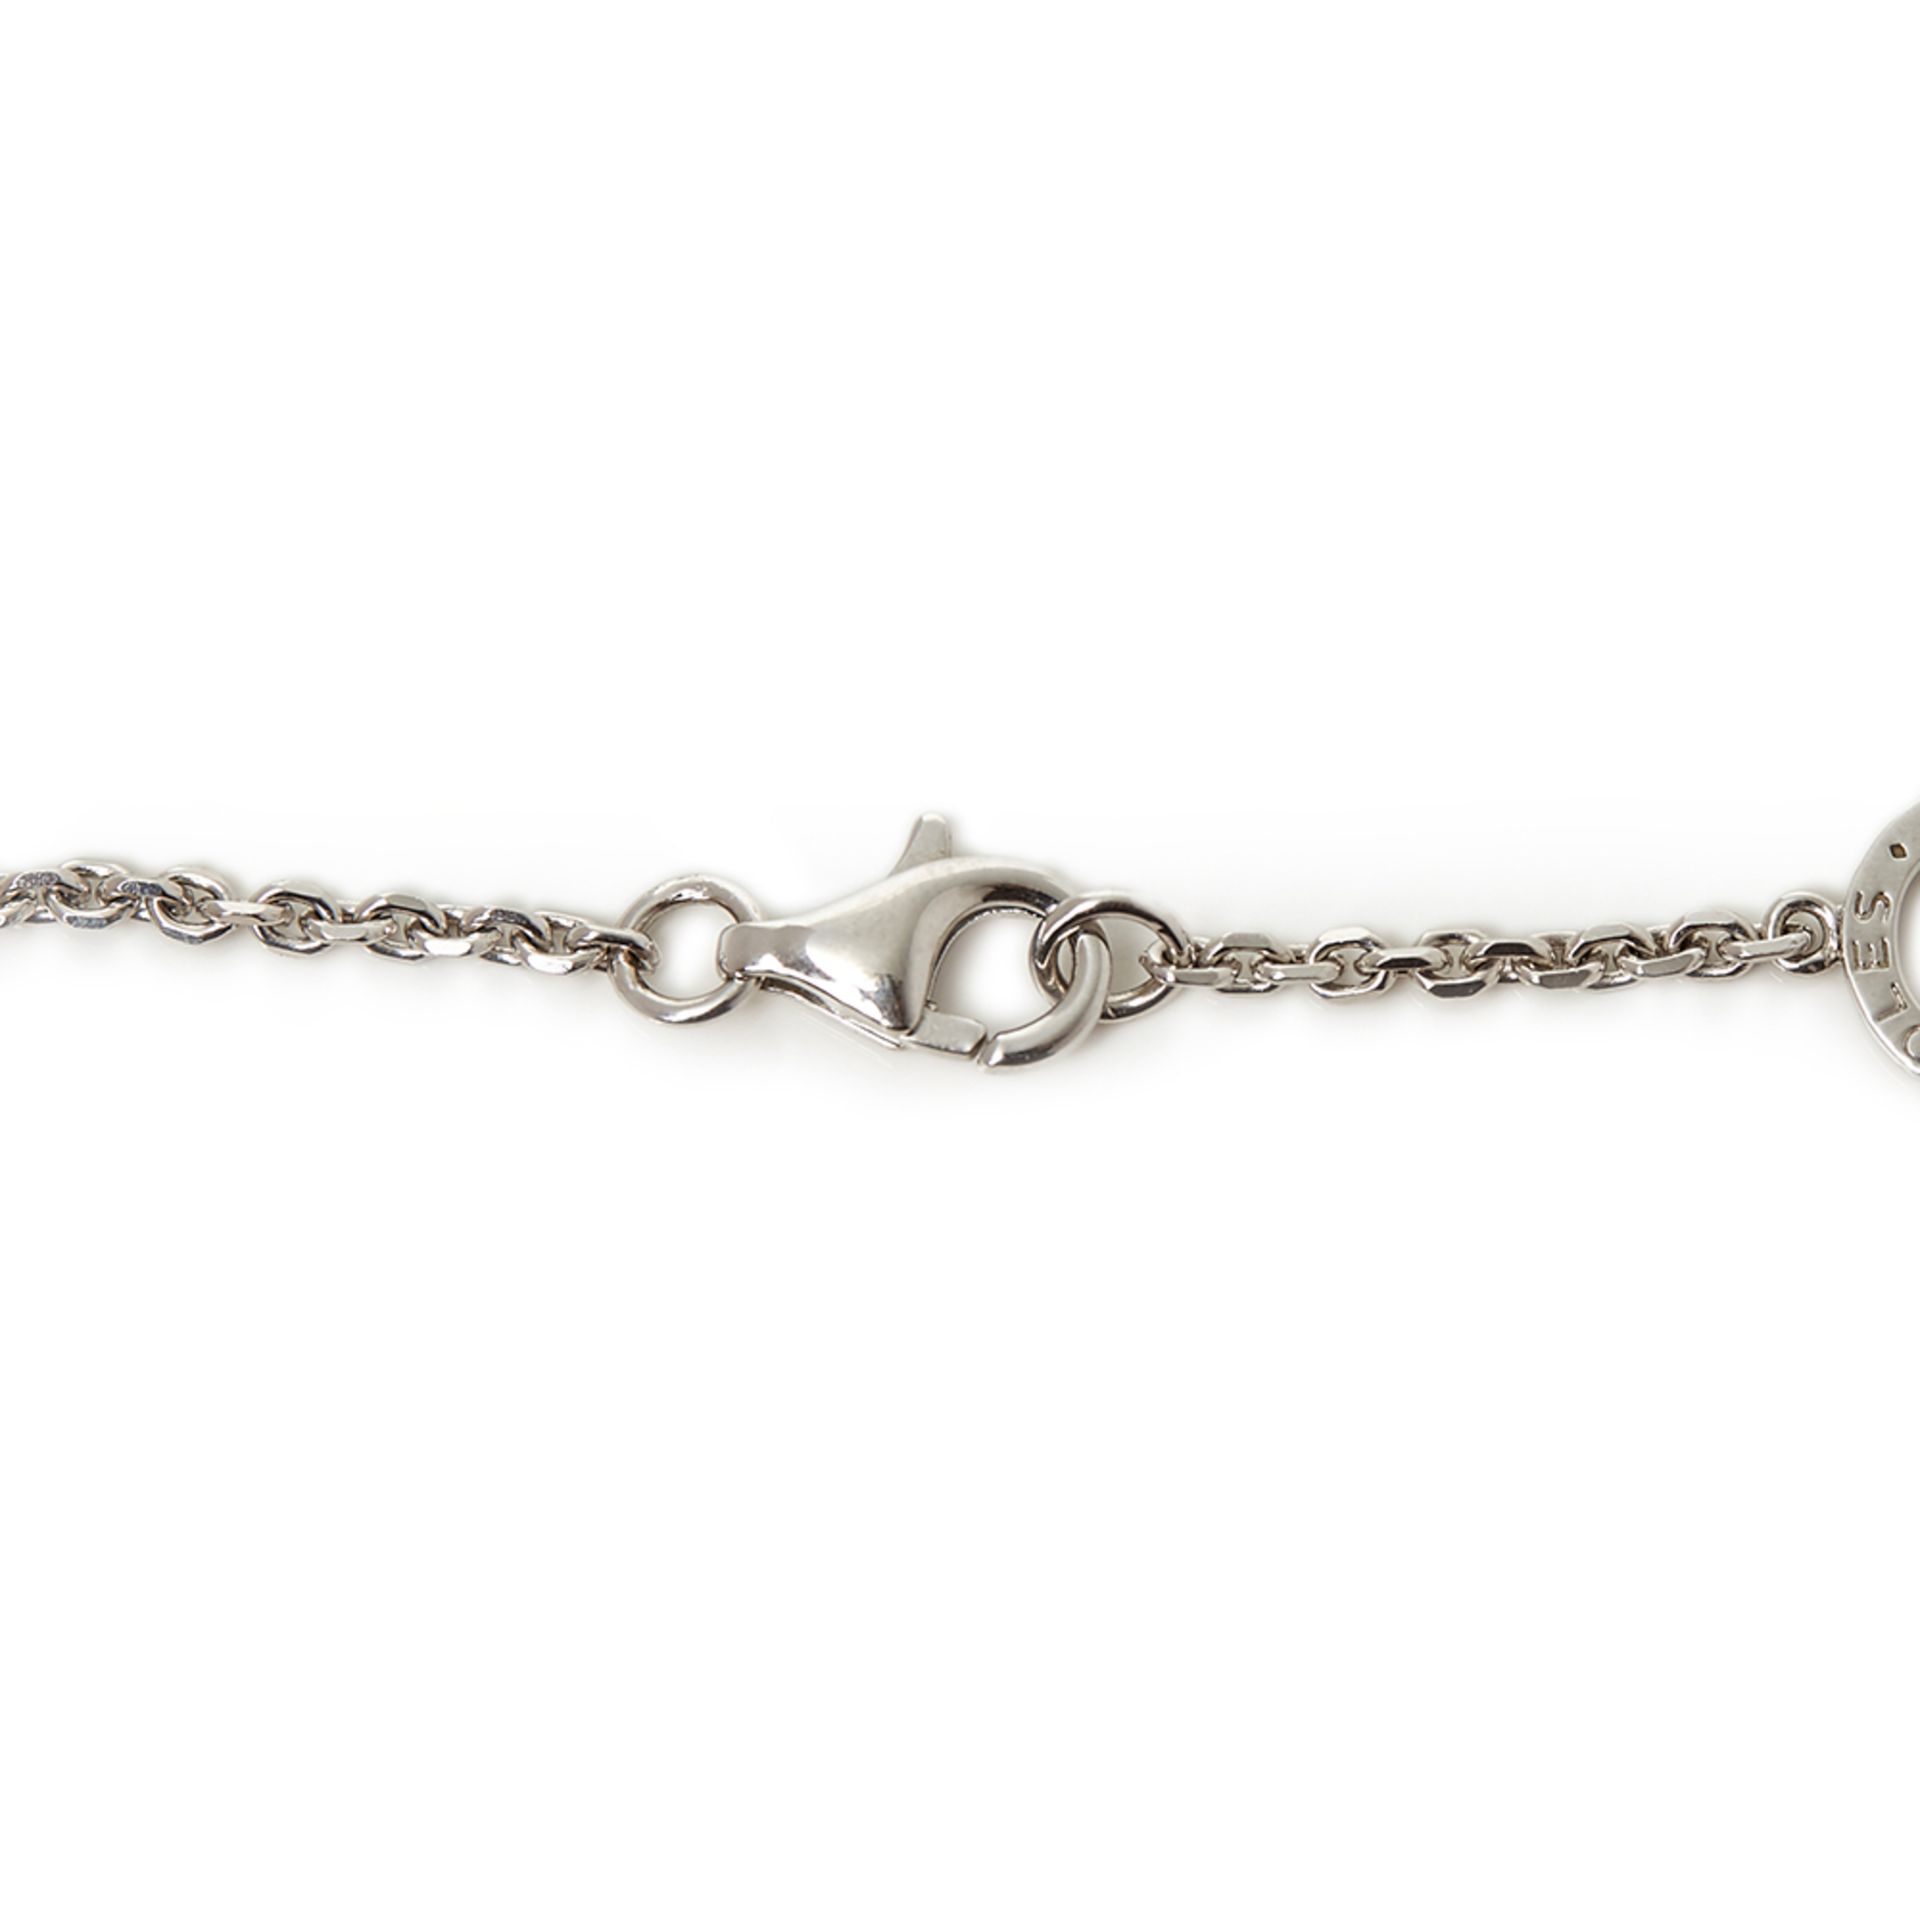 Boodles 18k White Gold Diamond Blossom Necklace - Image 3 of 9